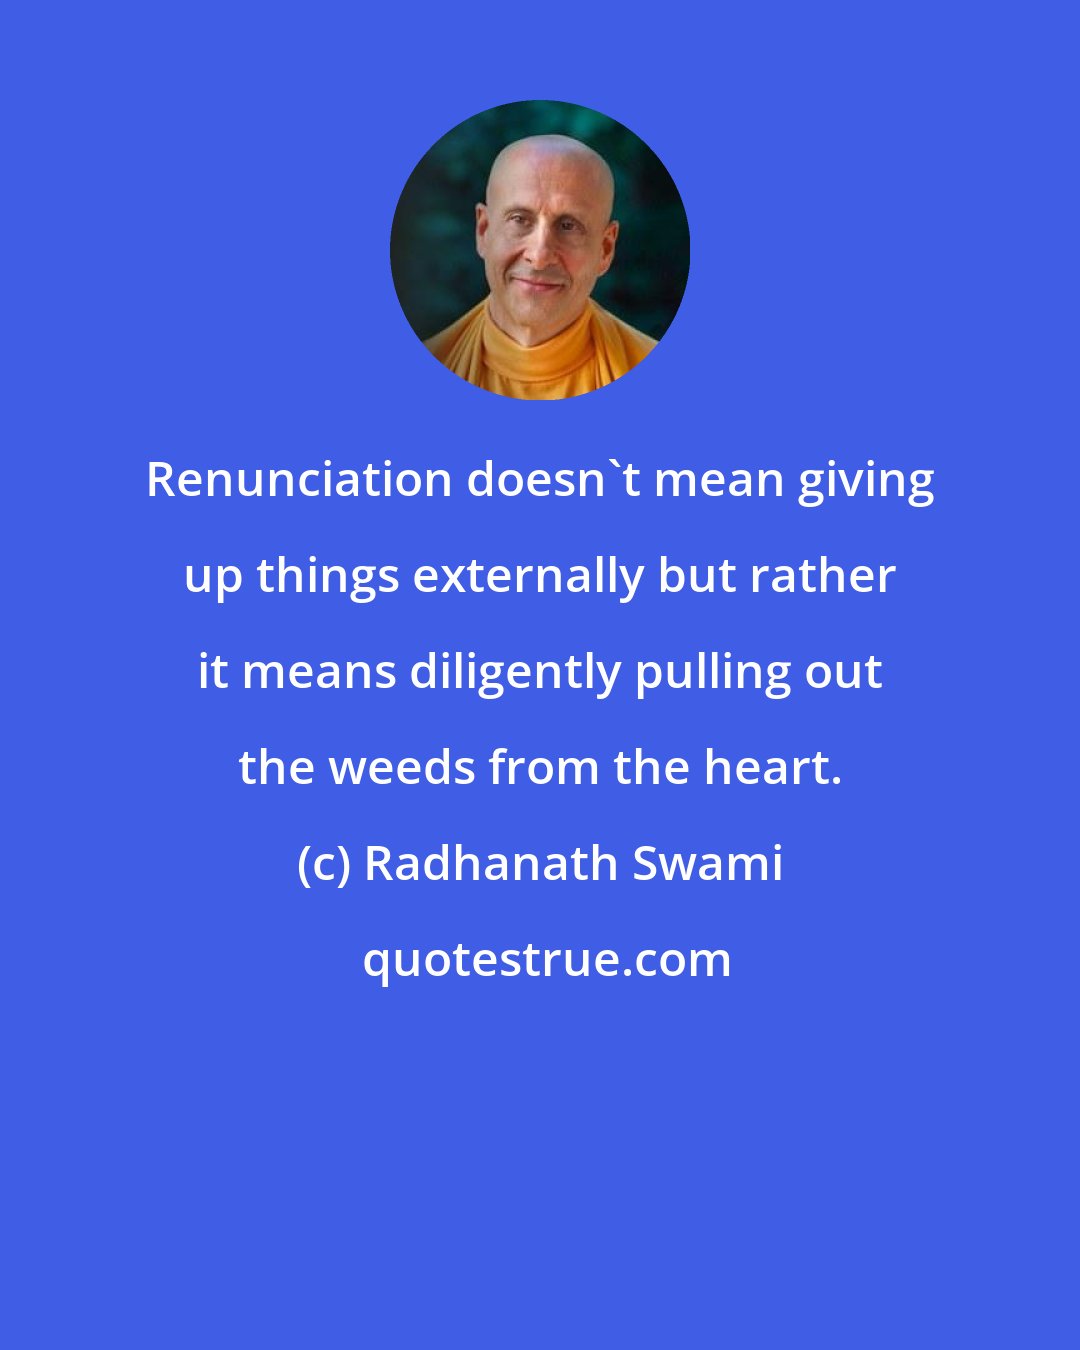 Radhanath Swami: Renunciation doesn't mean giving up things externally but rather it means diligently pulling out the weeds from the heart.